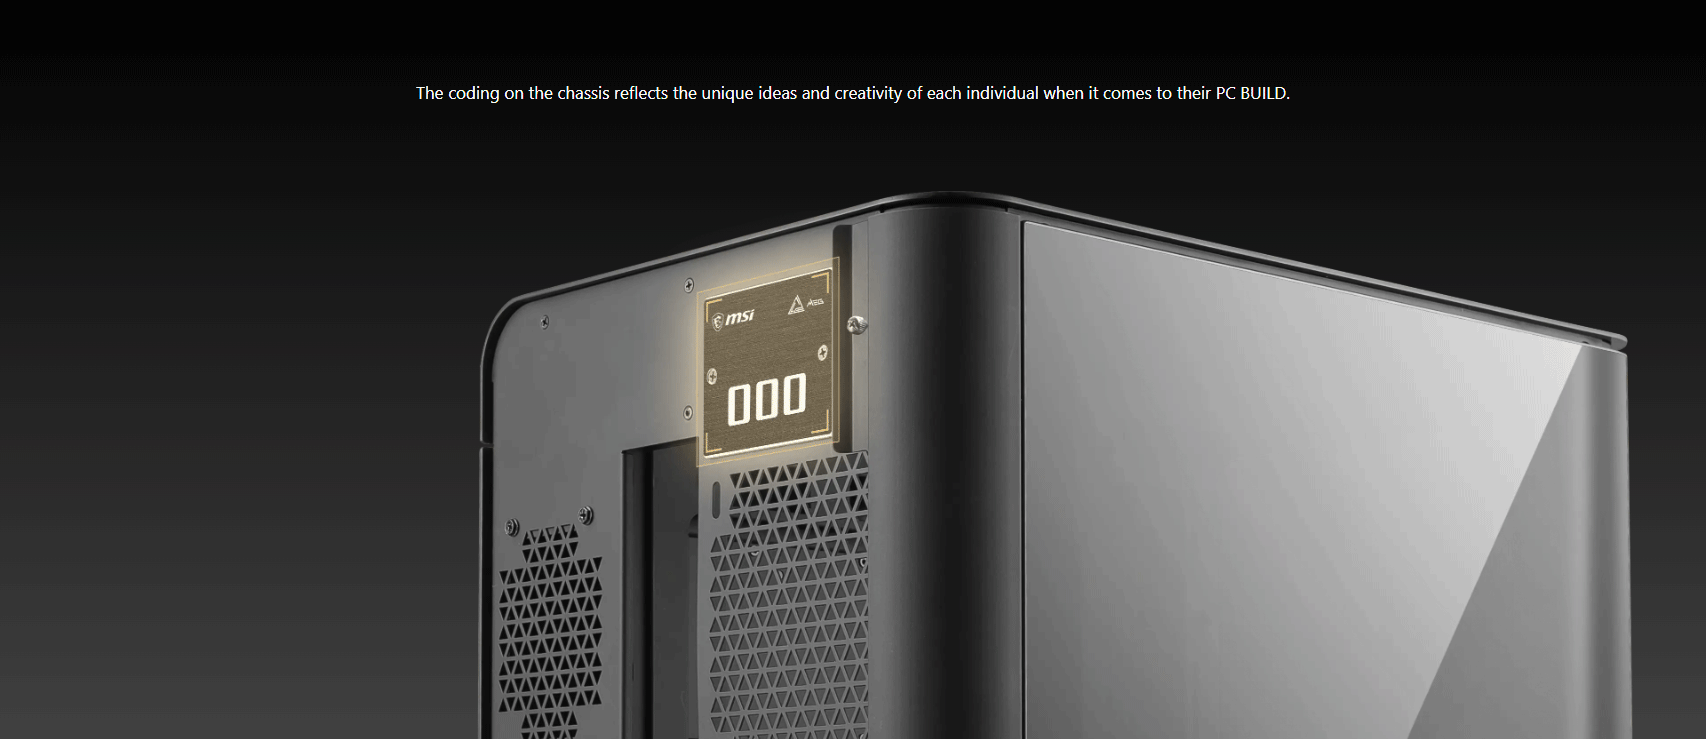 The coding on the chassis reflects the unique ideas and creativity of each individual when it comes to their PC BUILD.